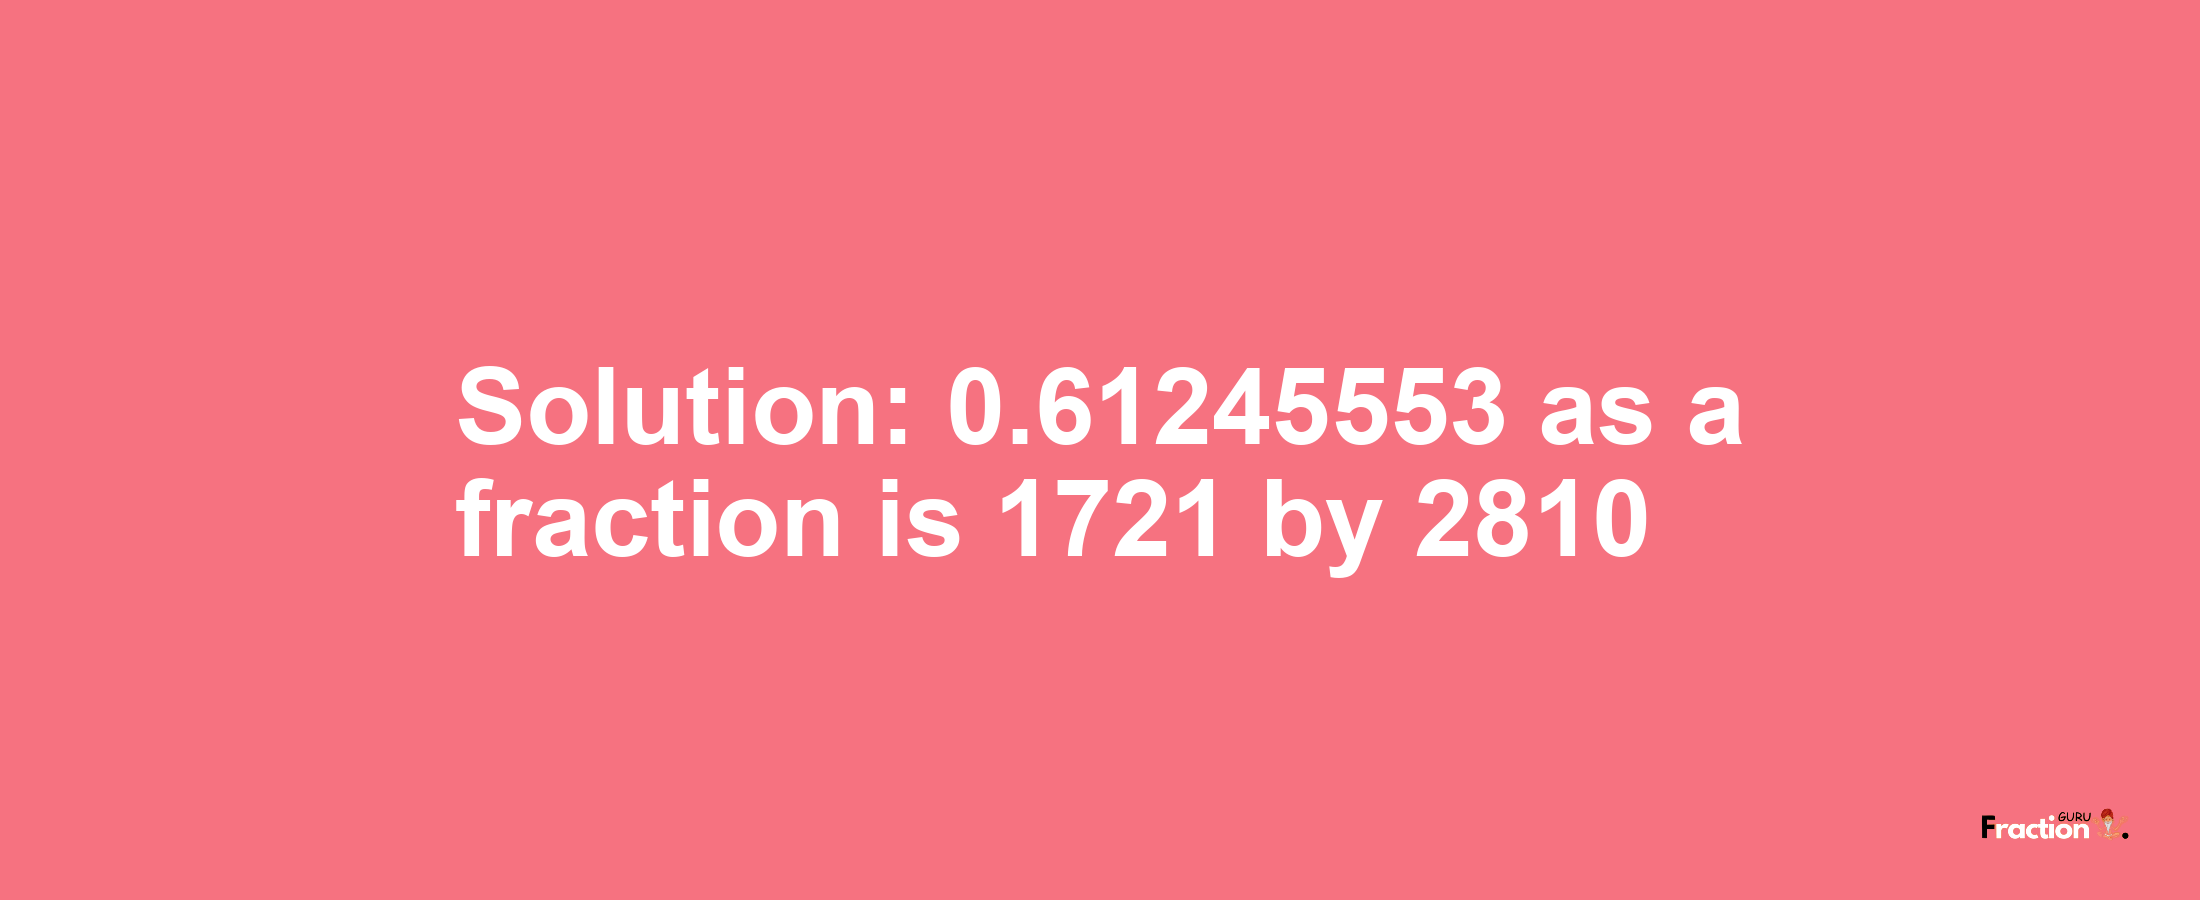 Solution:0.61245553 as a fraction is 1721/2810